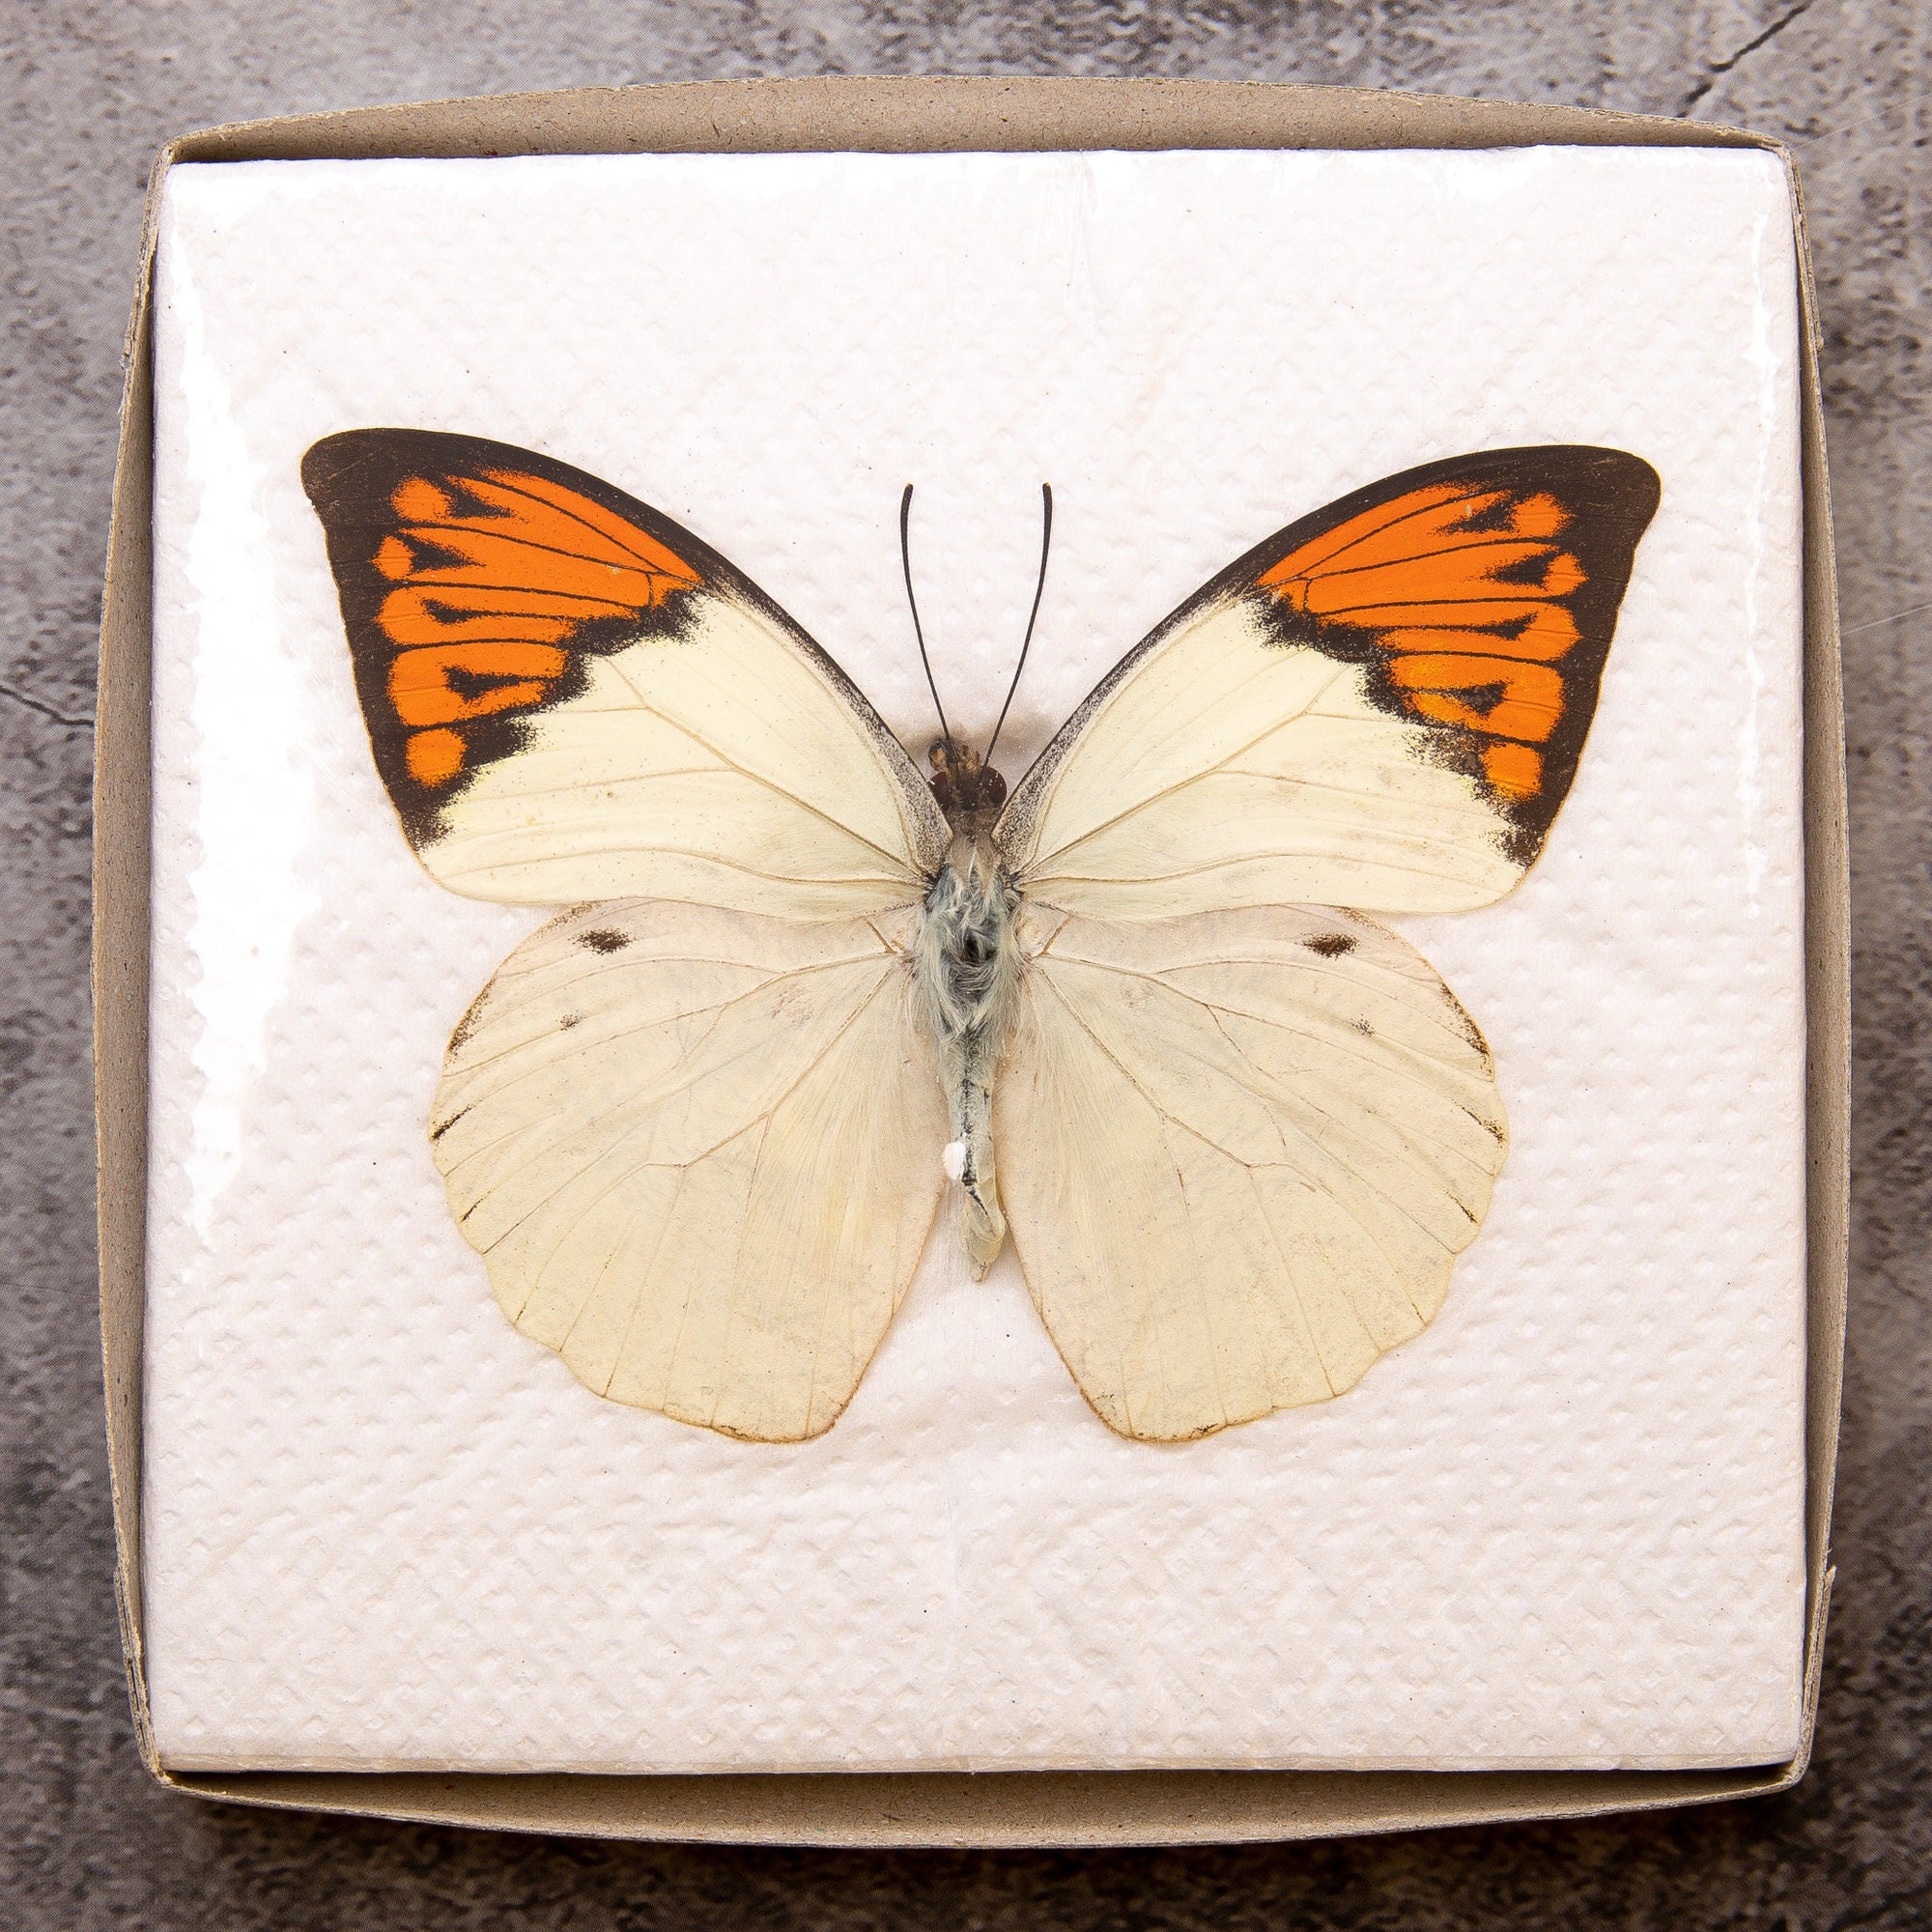 Pack of 2 Great Orange Tip Butterflies (Hebomoia glaucippe) WINGS-SPREAD, Ethically Sourced Preserved Specimens for Collecting & Art